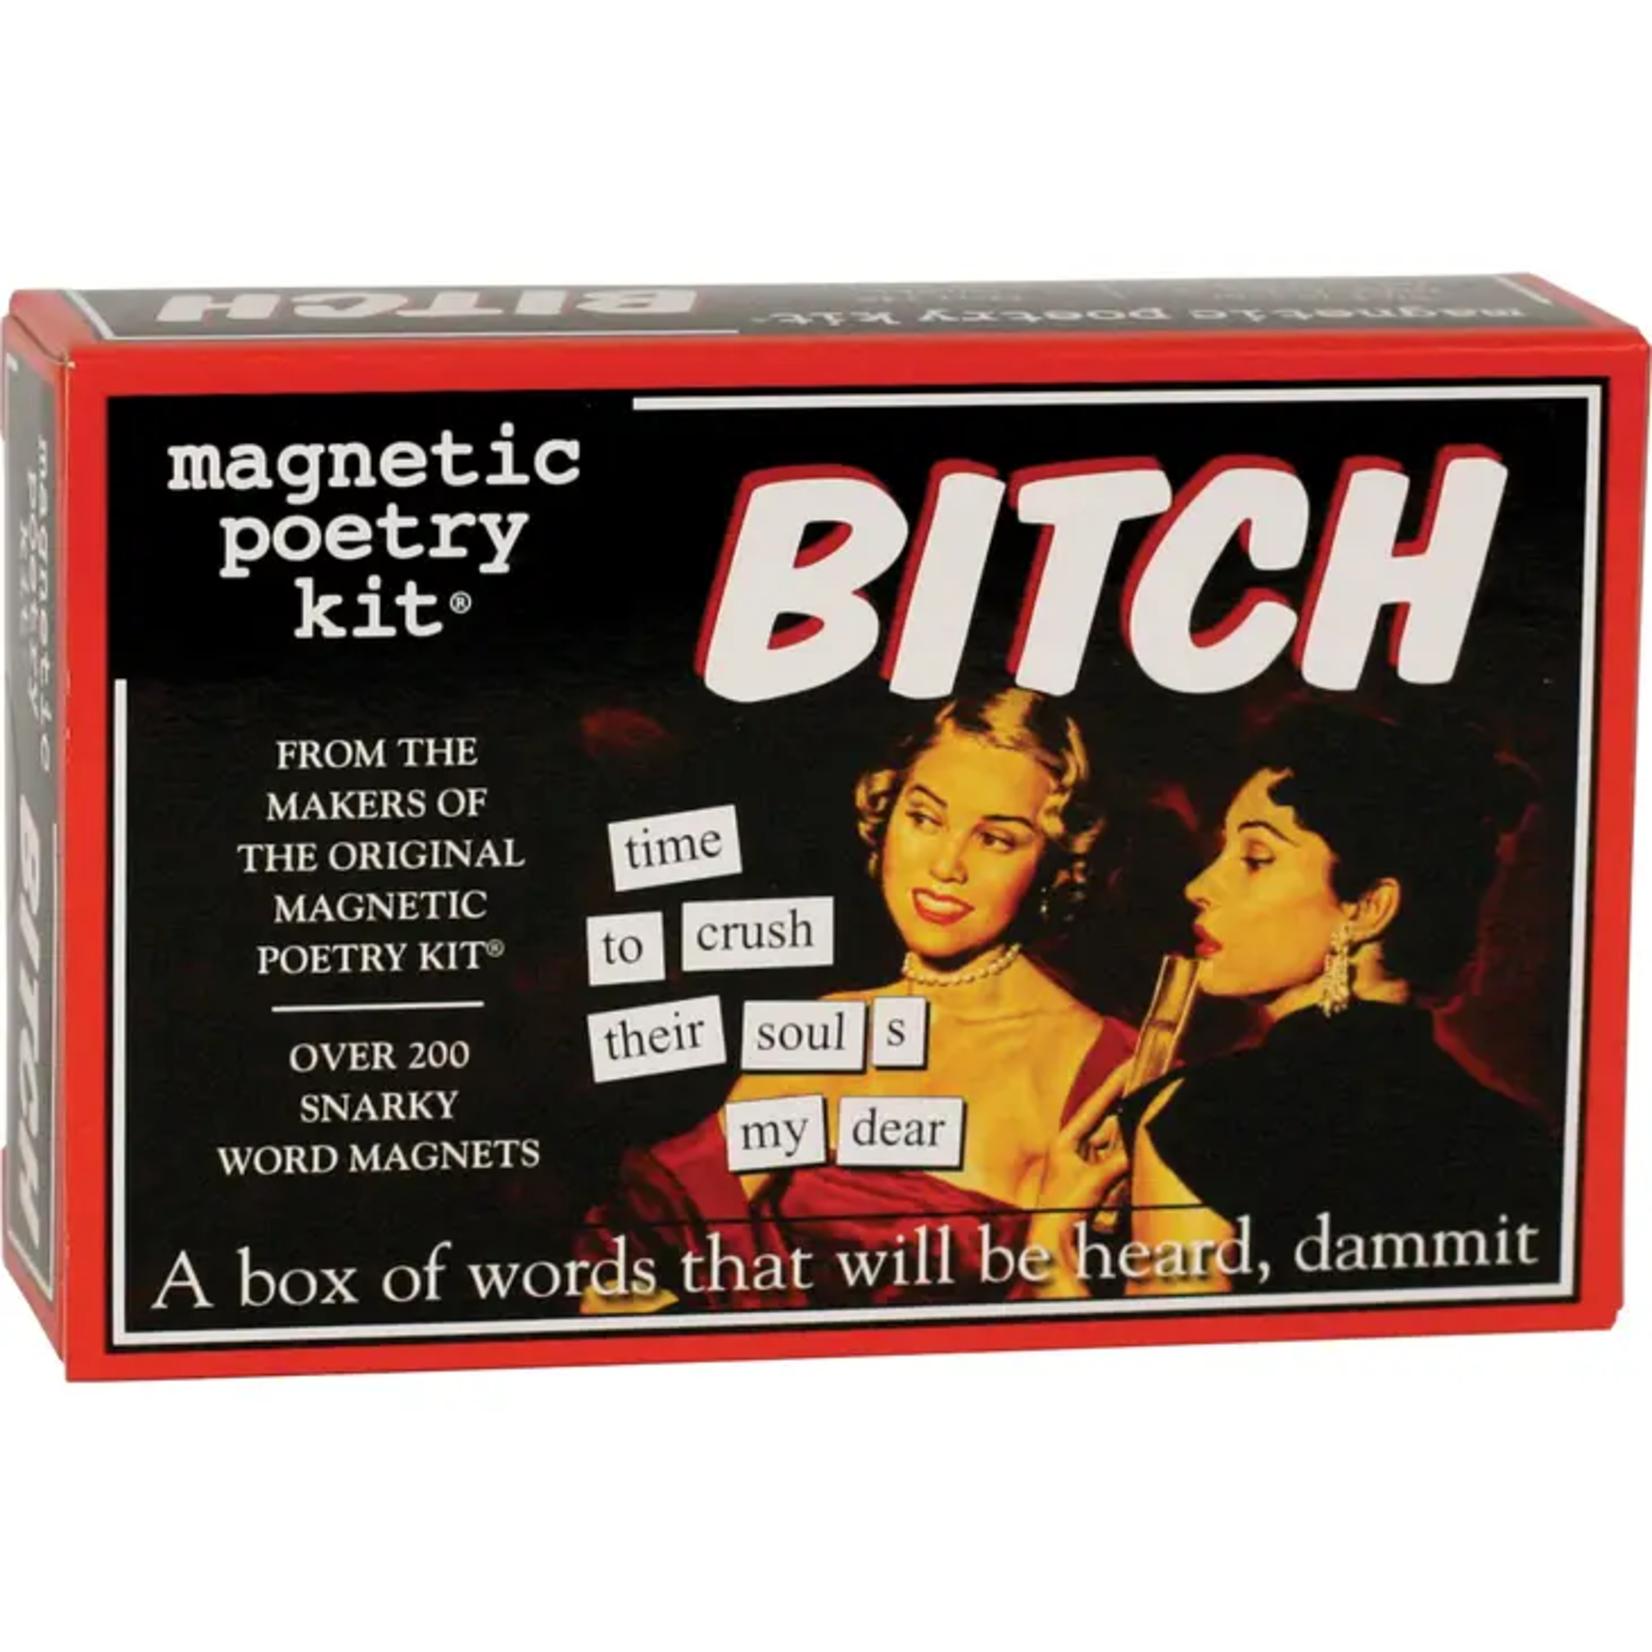 Magnetic Poetry B!tch Magnets